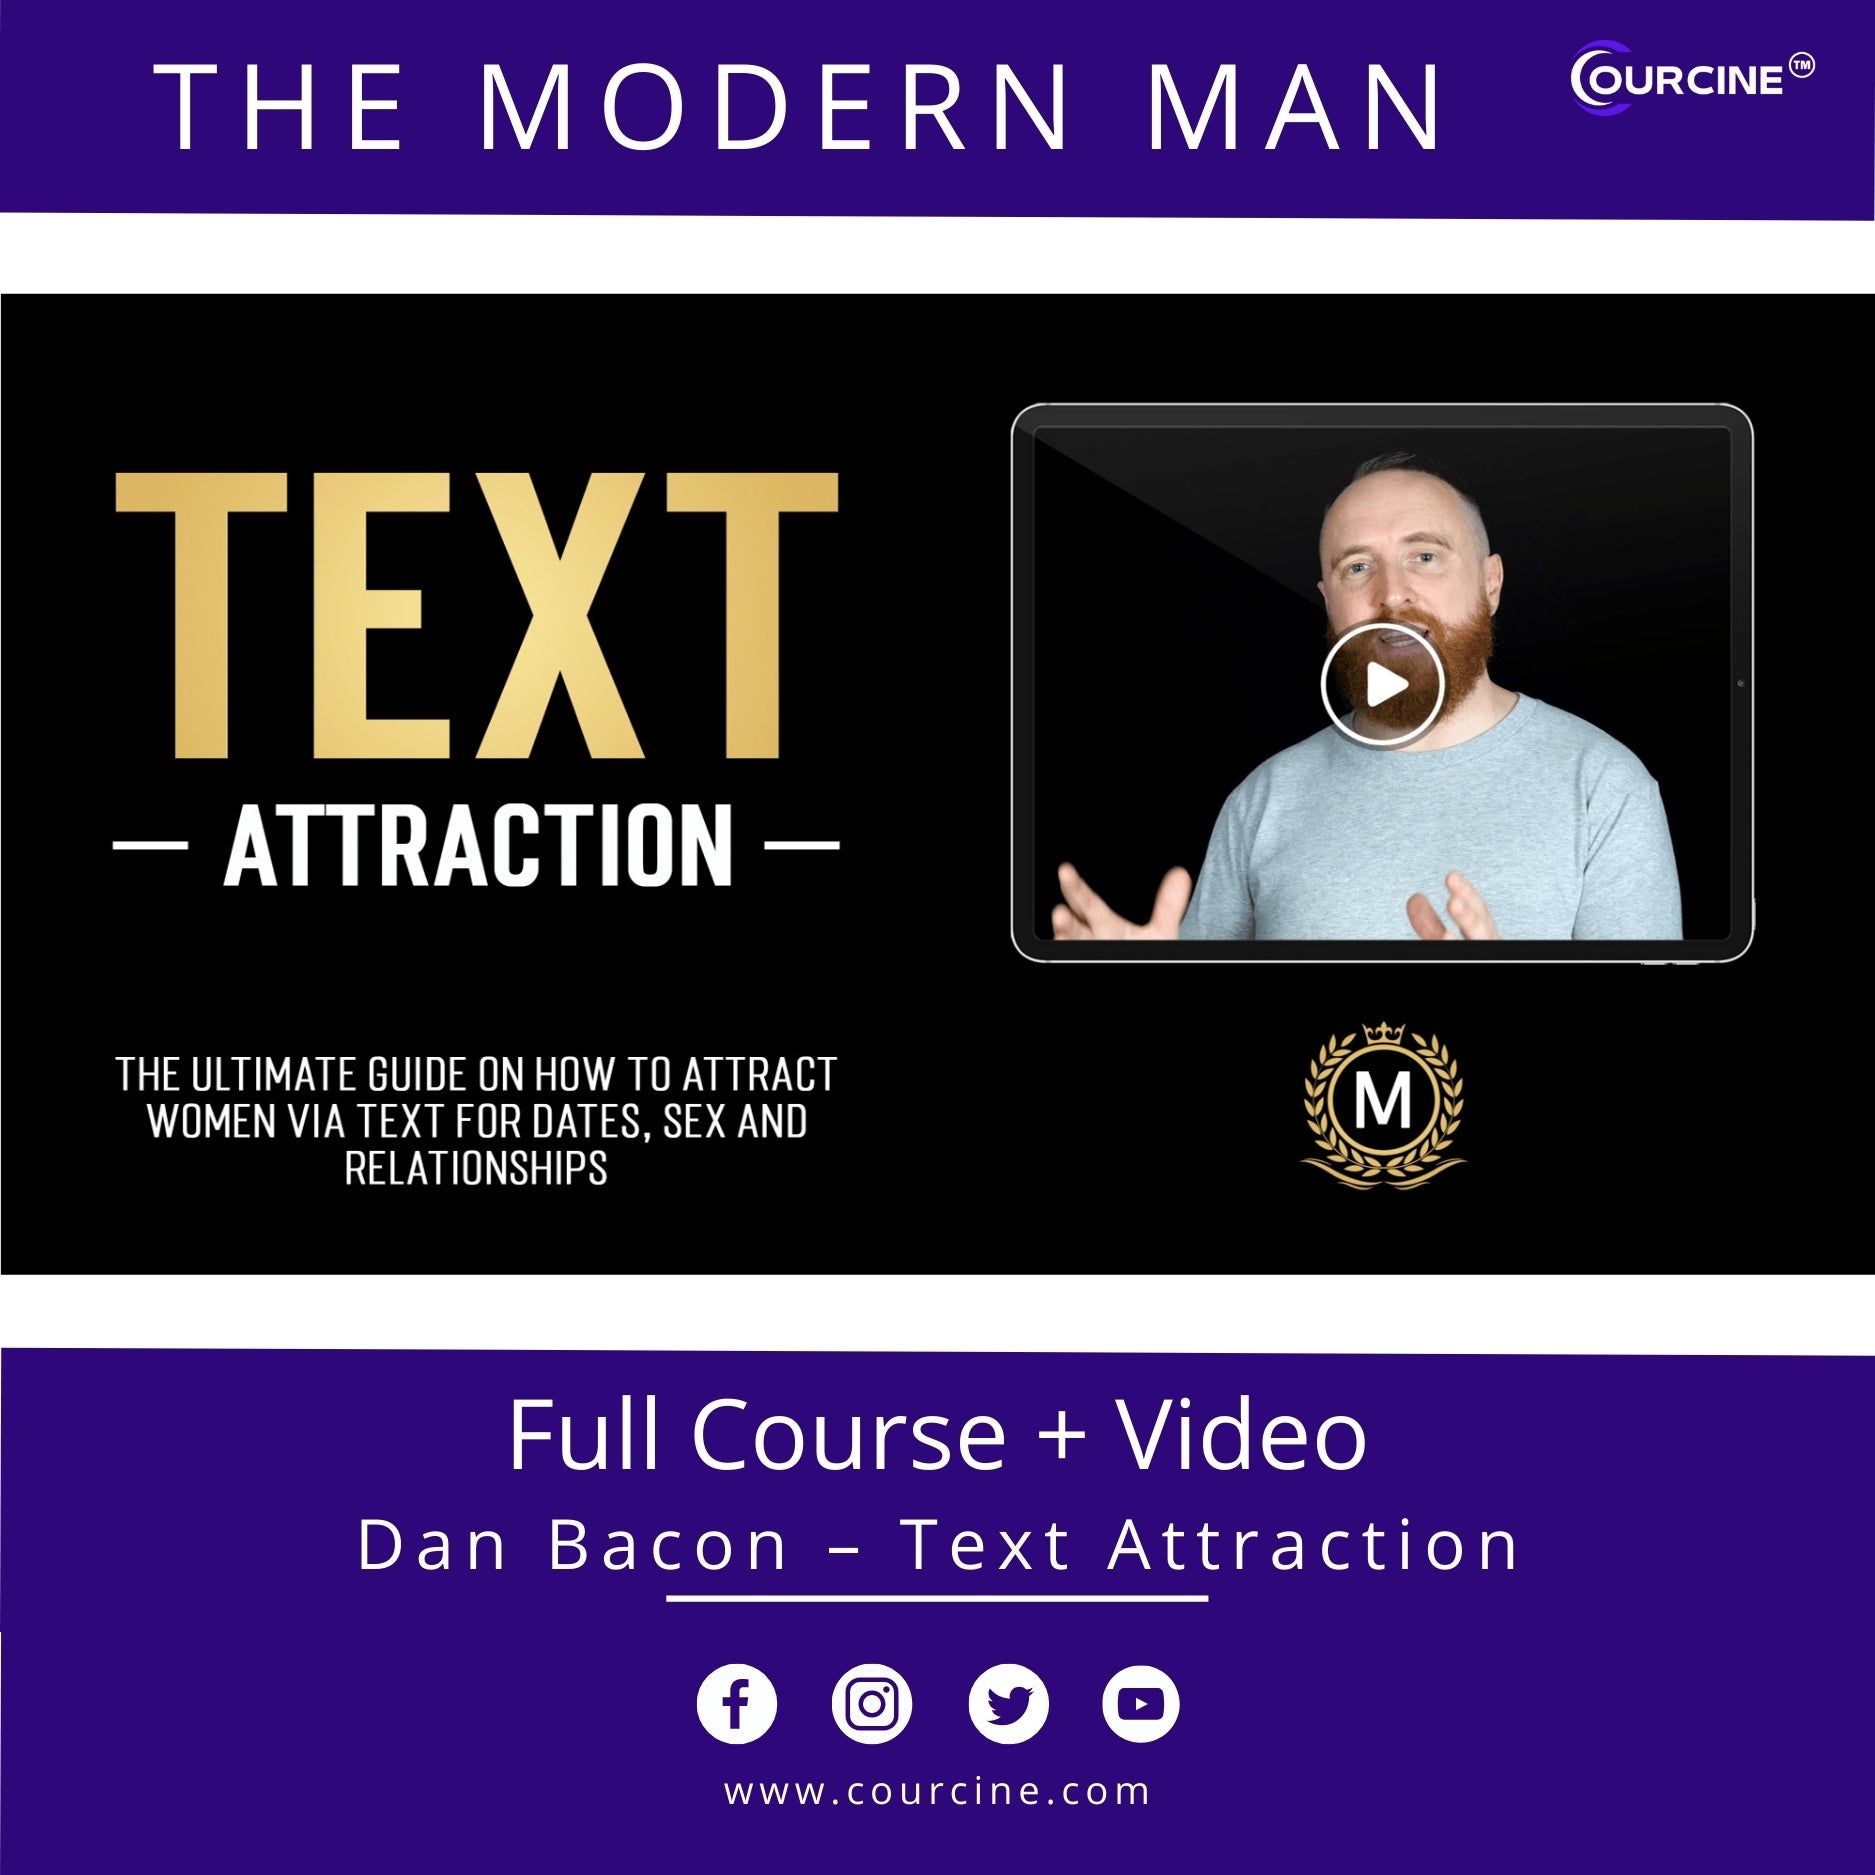 The Modern Man – Dan Bacon – Text Attraction Online Course  Drive link